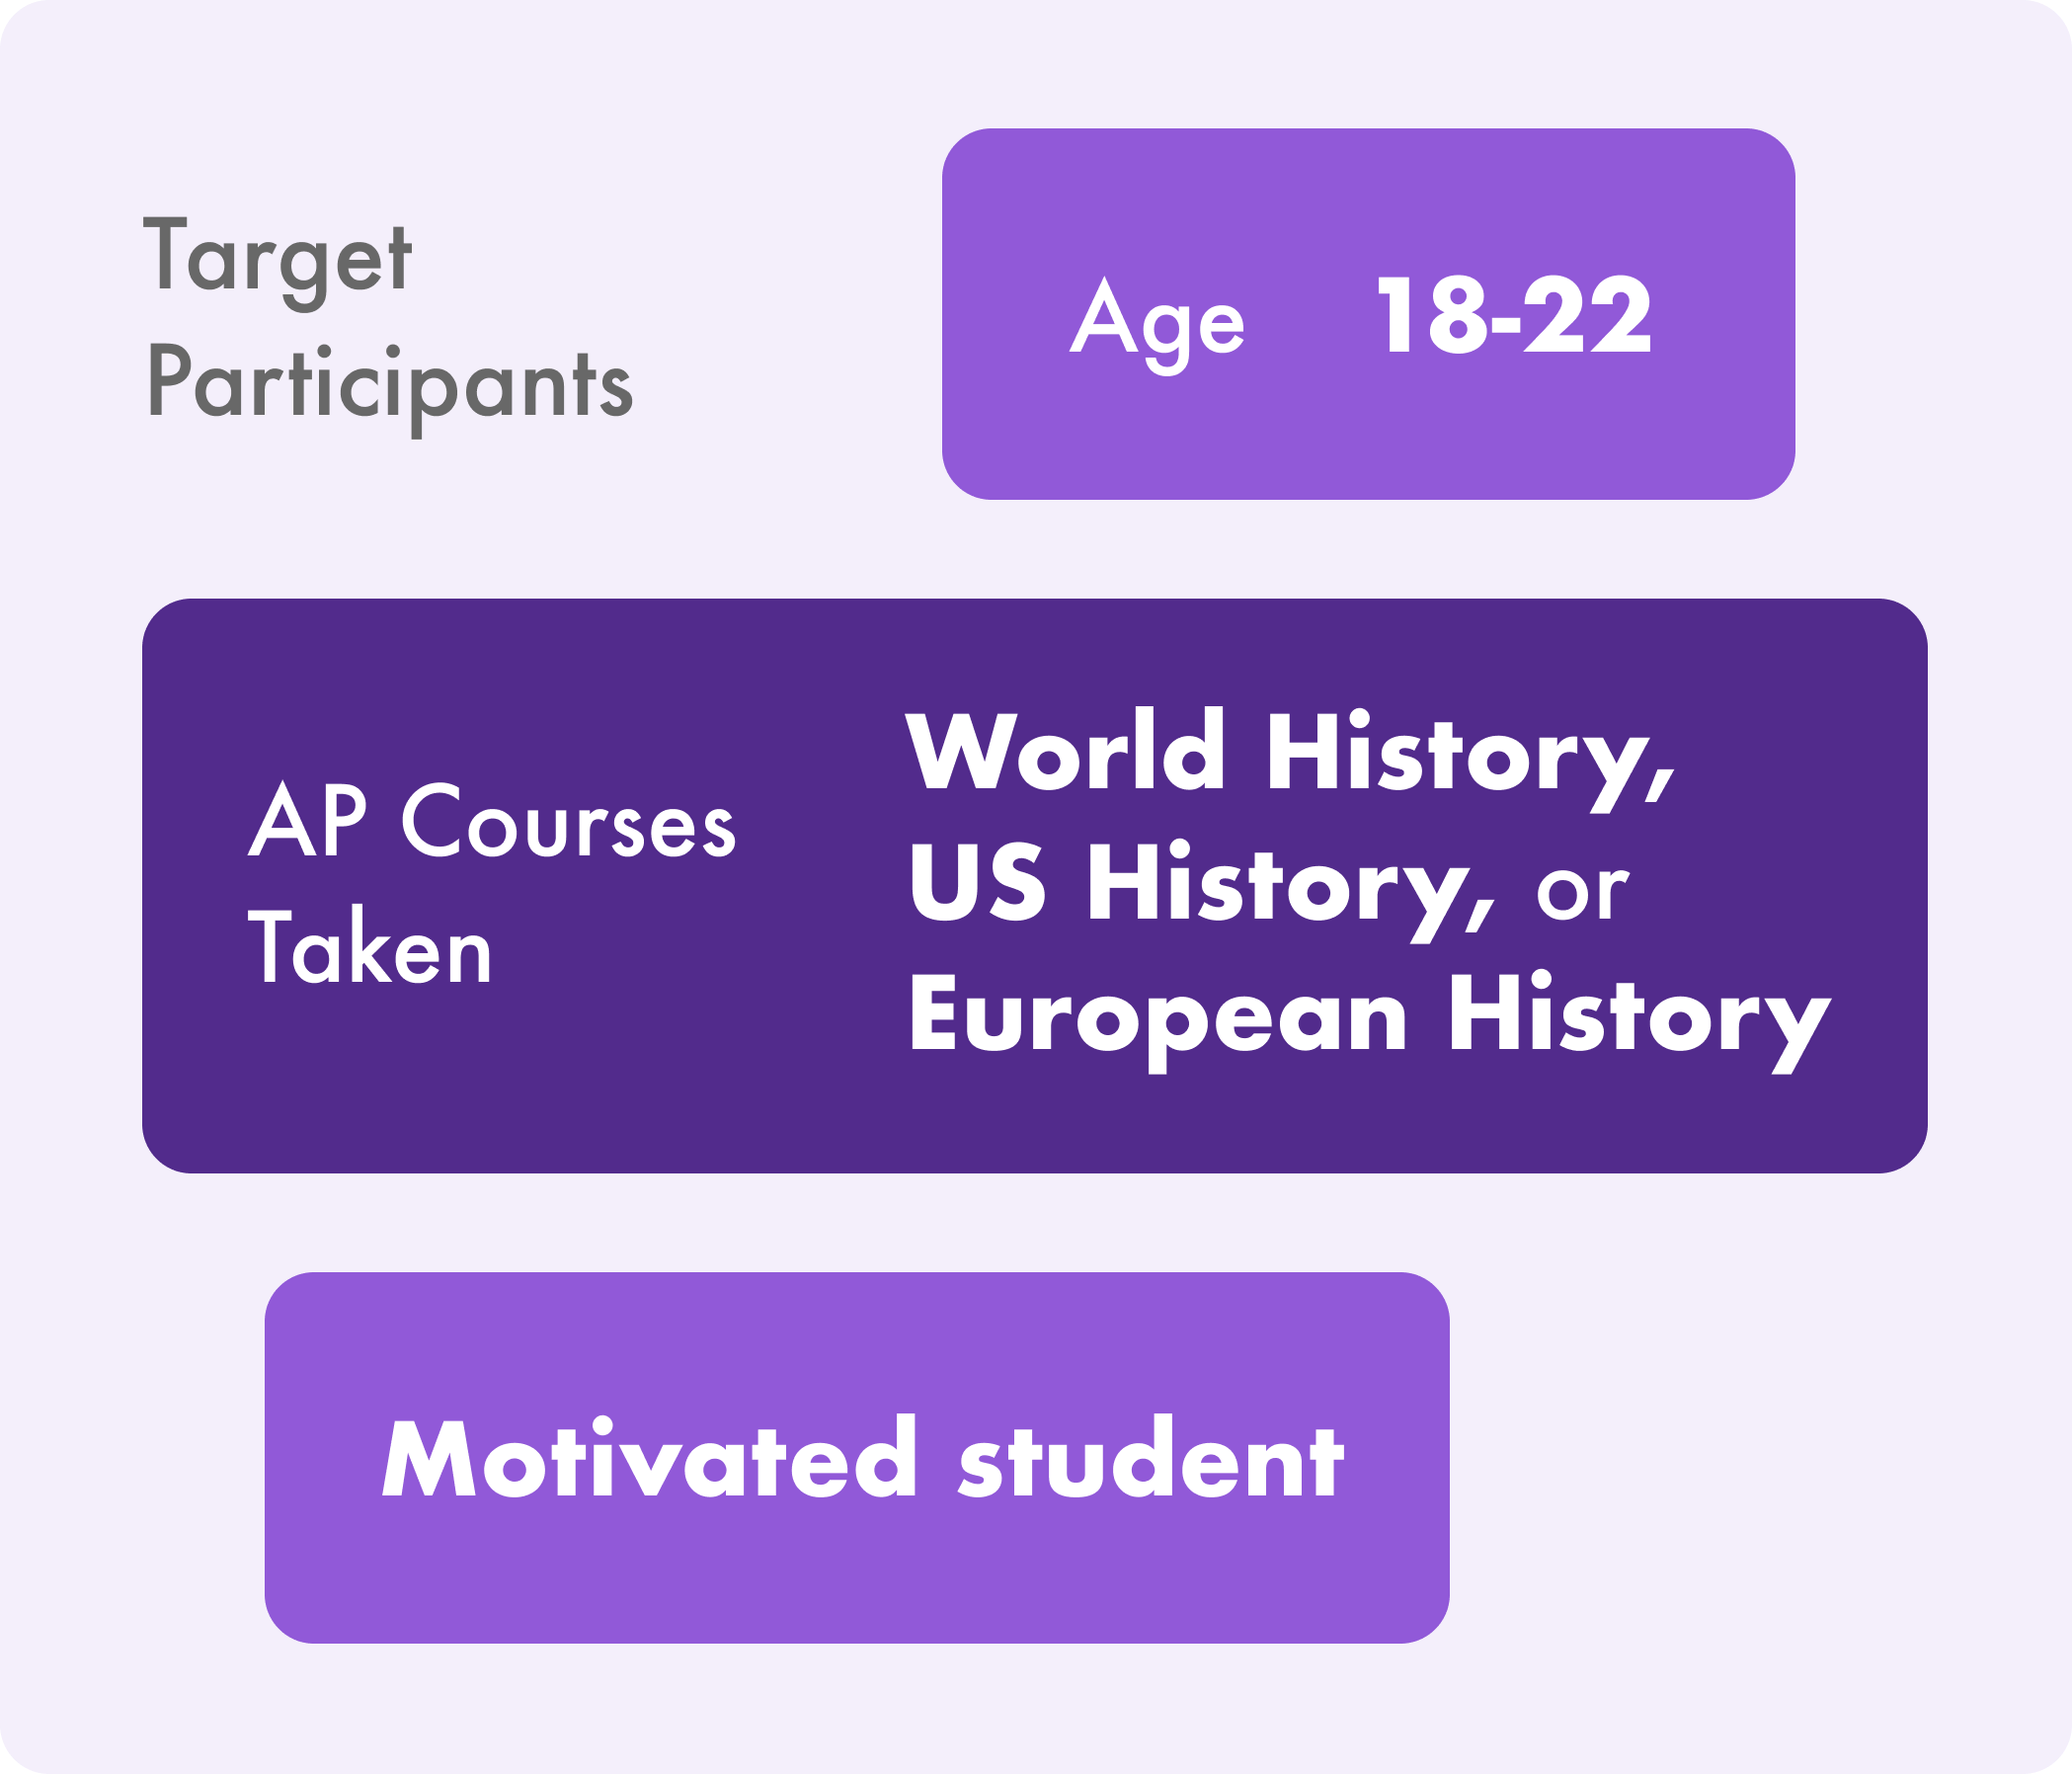 Target participants are aged 18-22, have taken an AP history course, and are/were motivated students